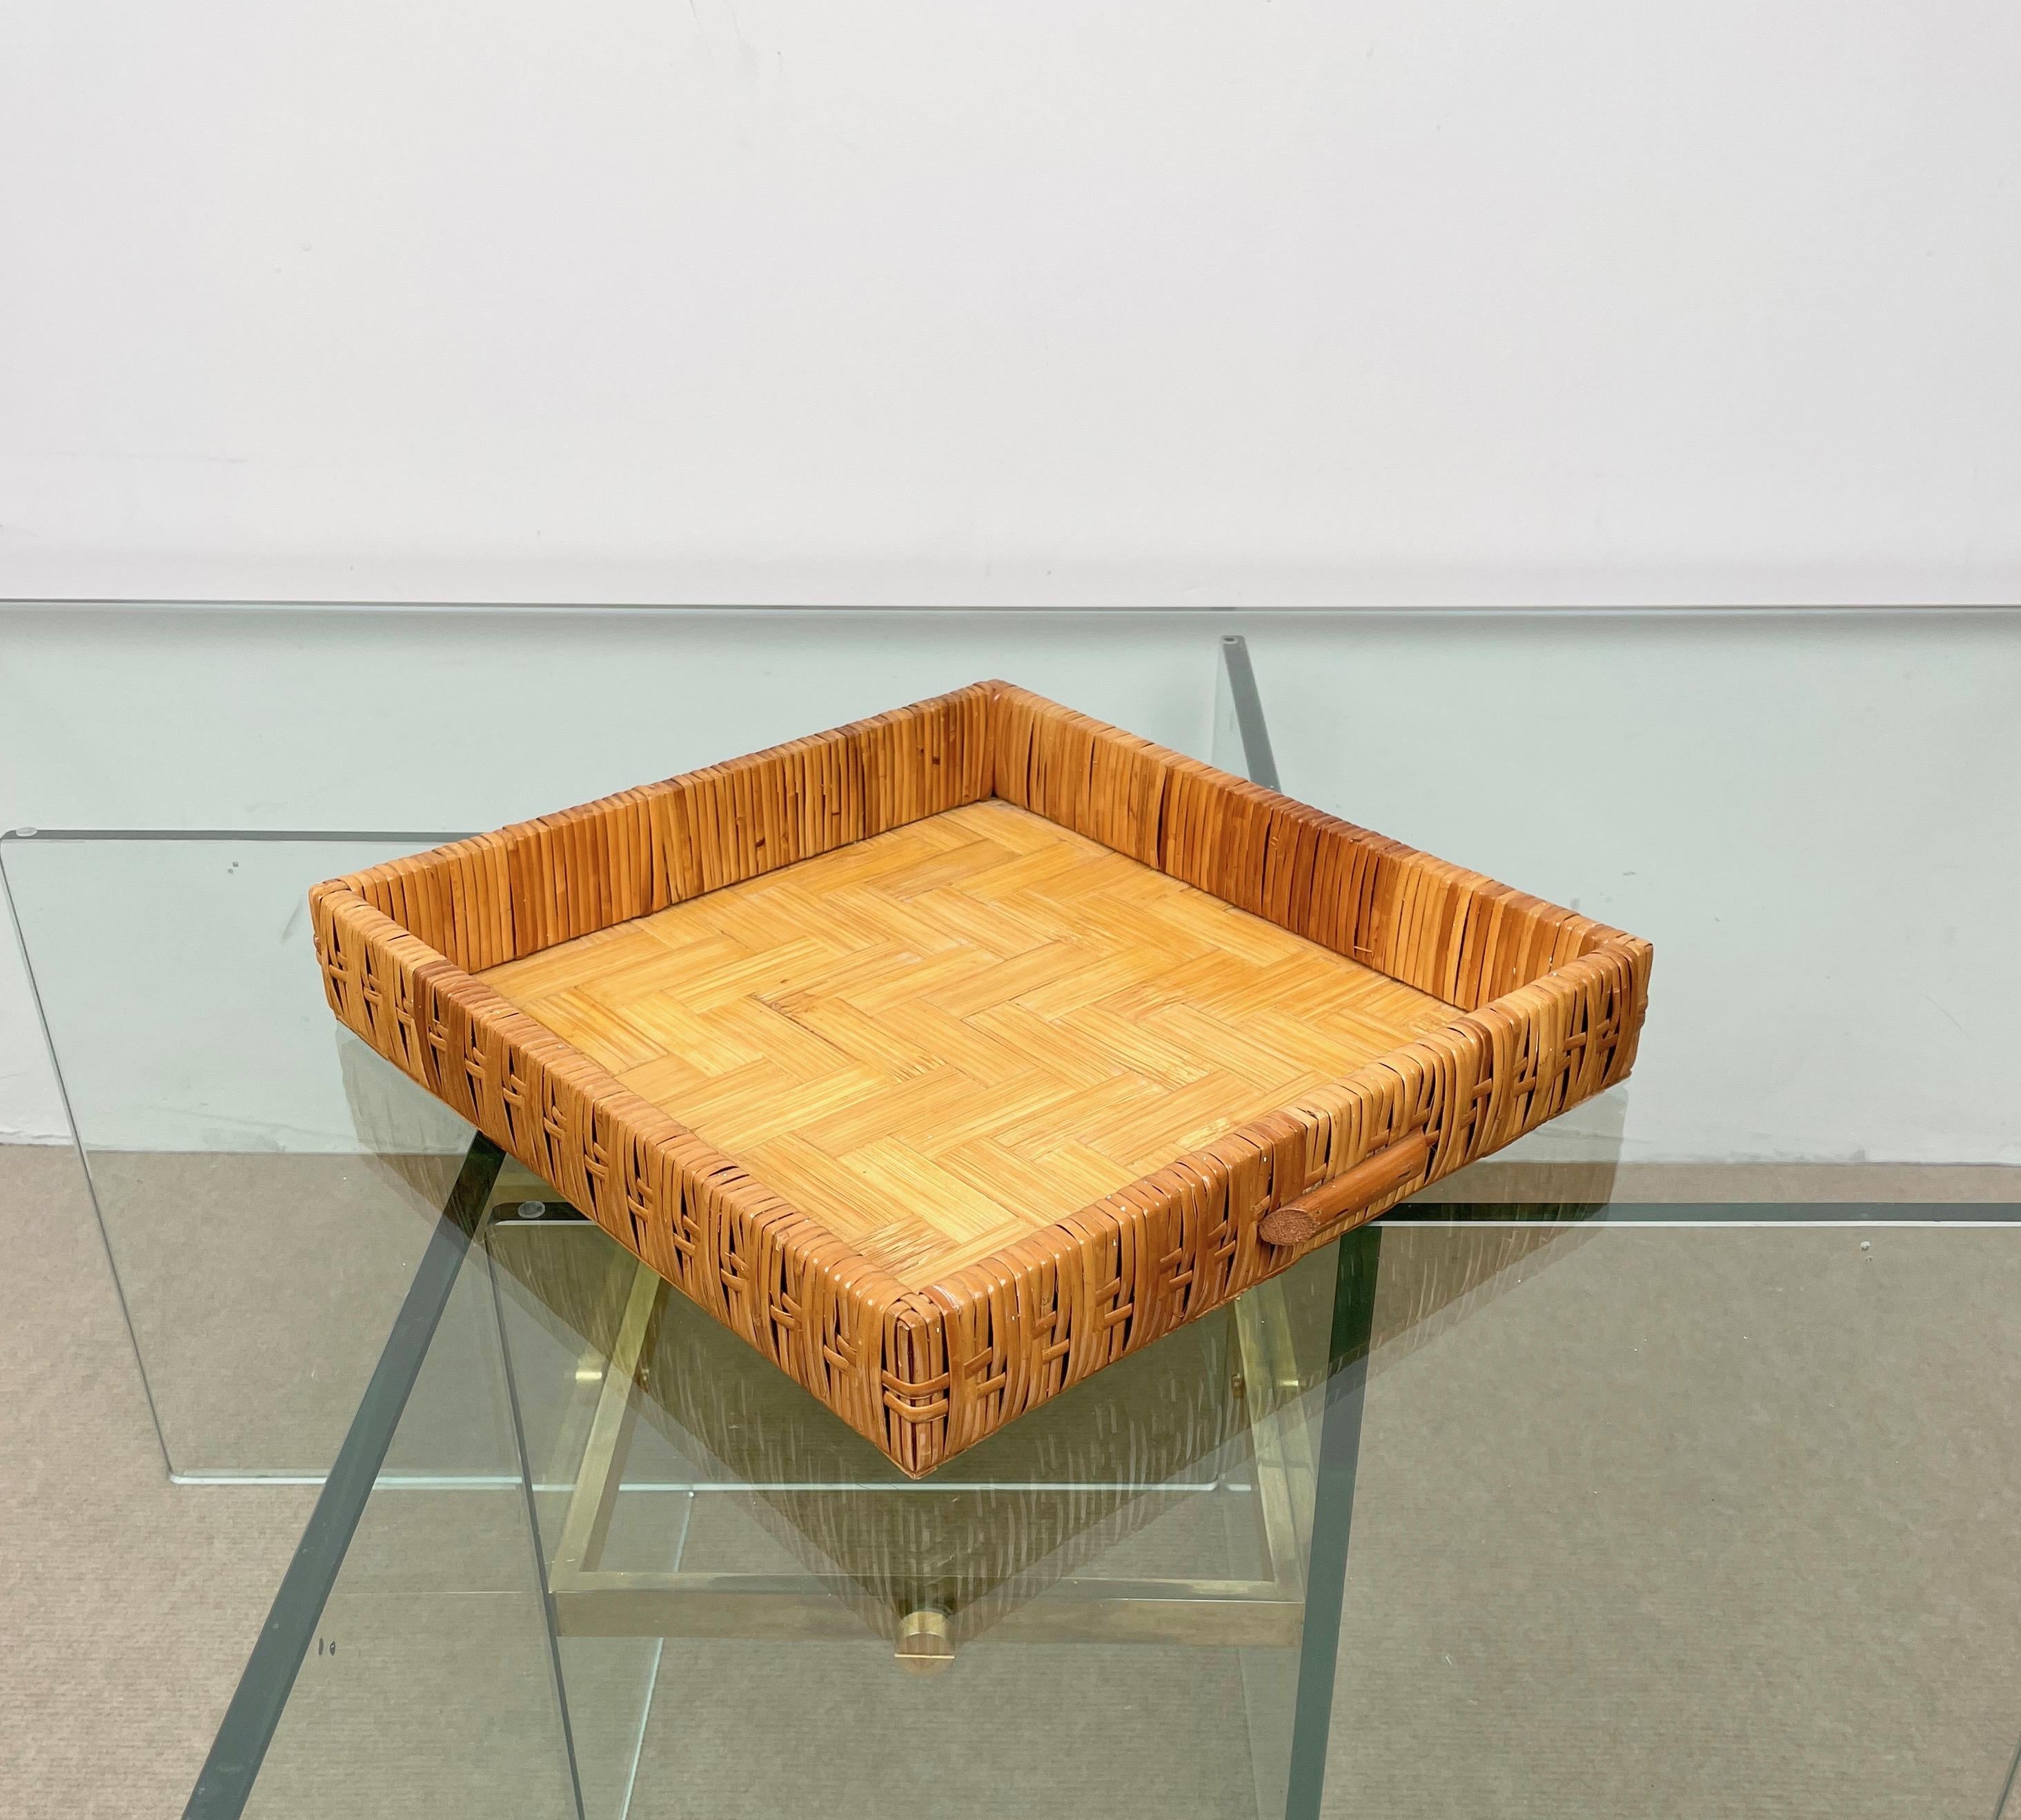 Squared centerpiece serving tray in bamboo and rattan. 

Made in Italy in the 1970s.